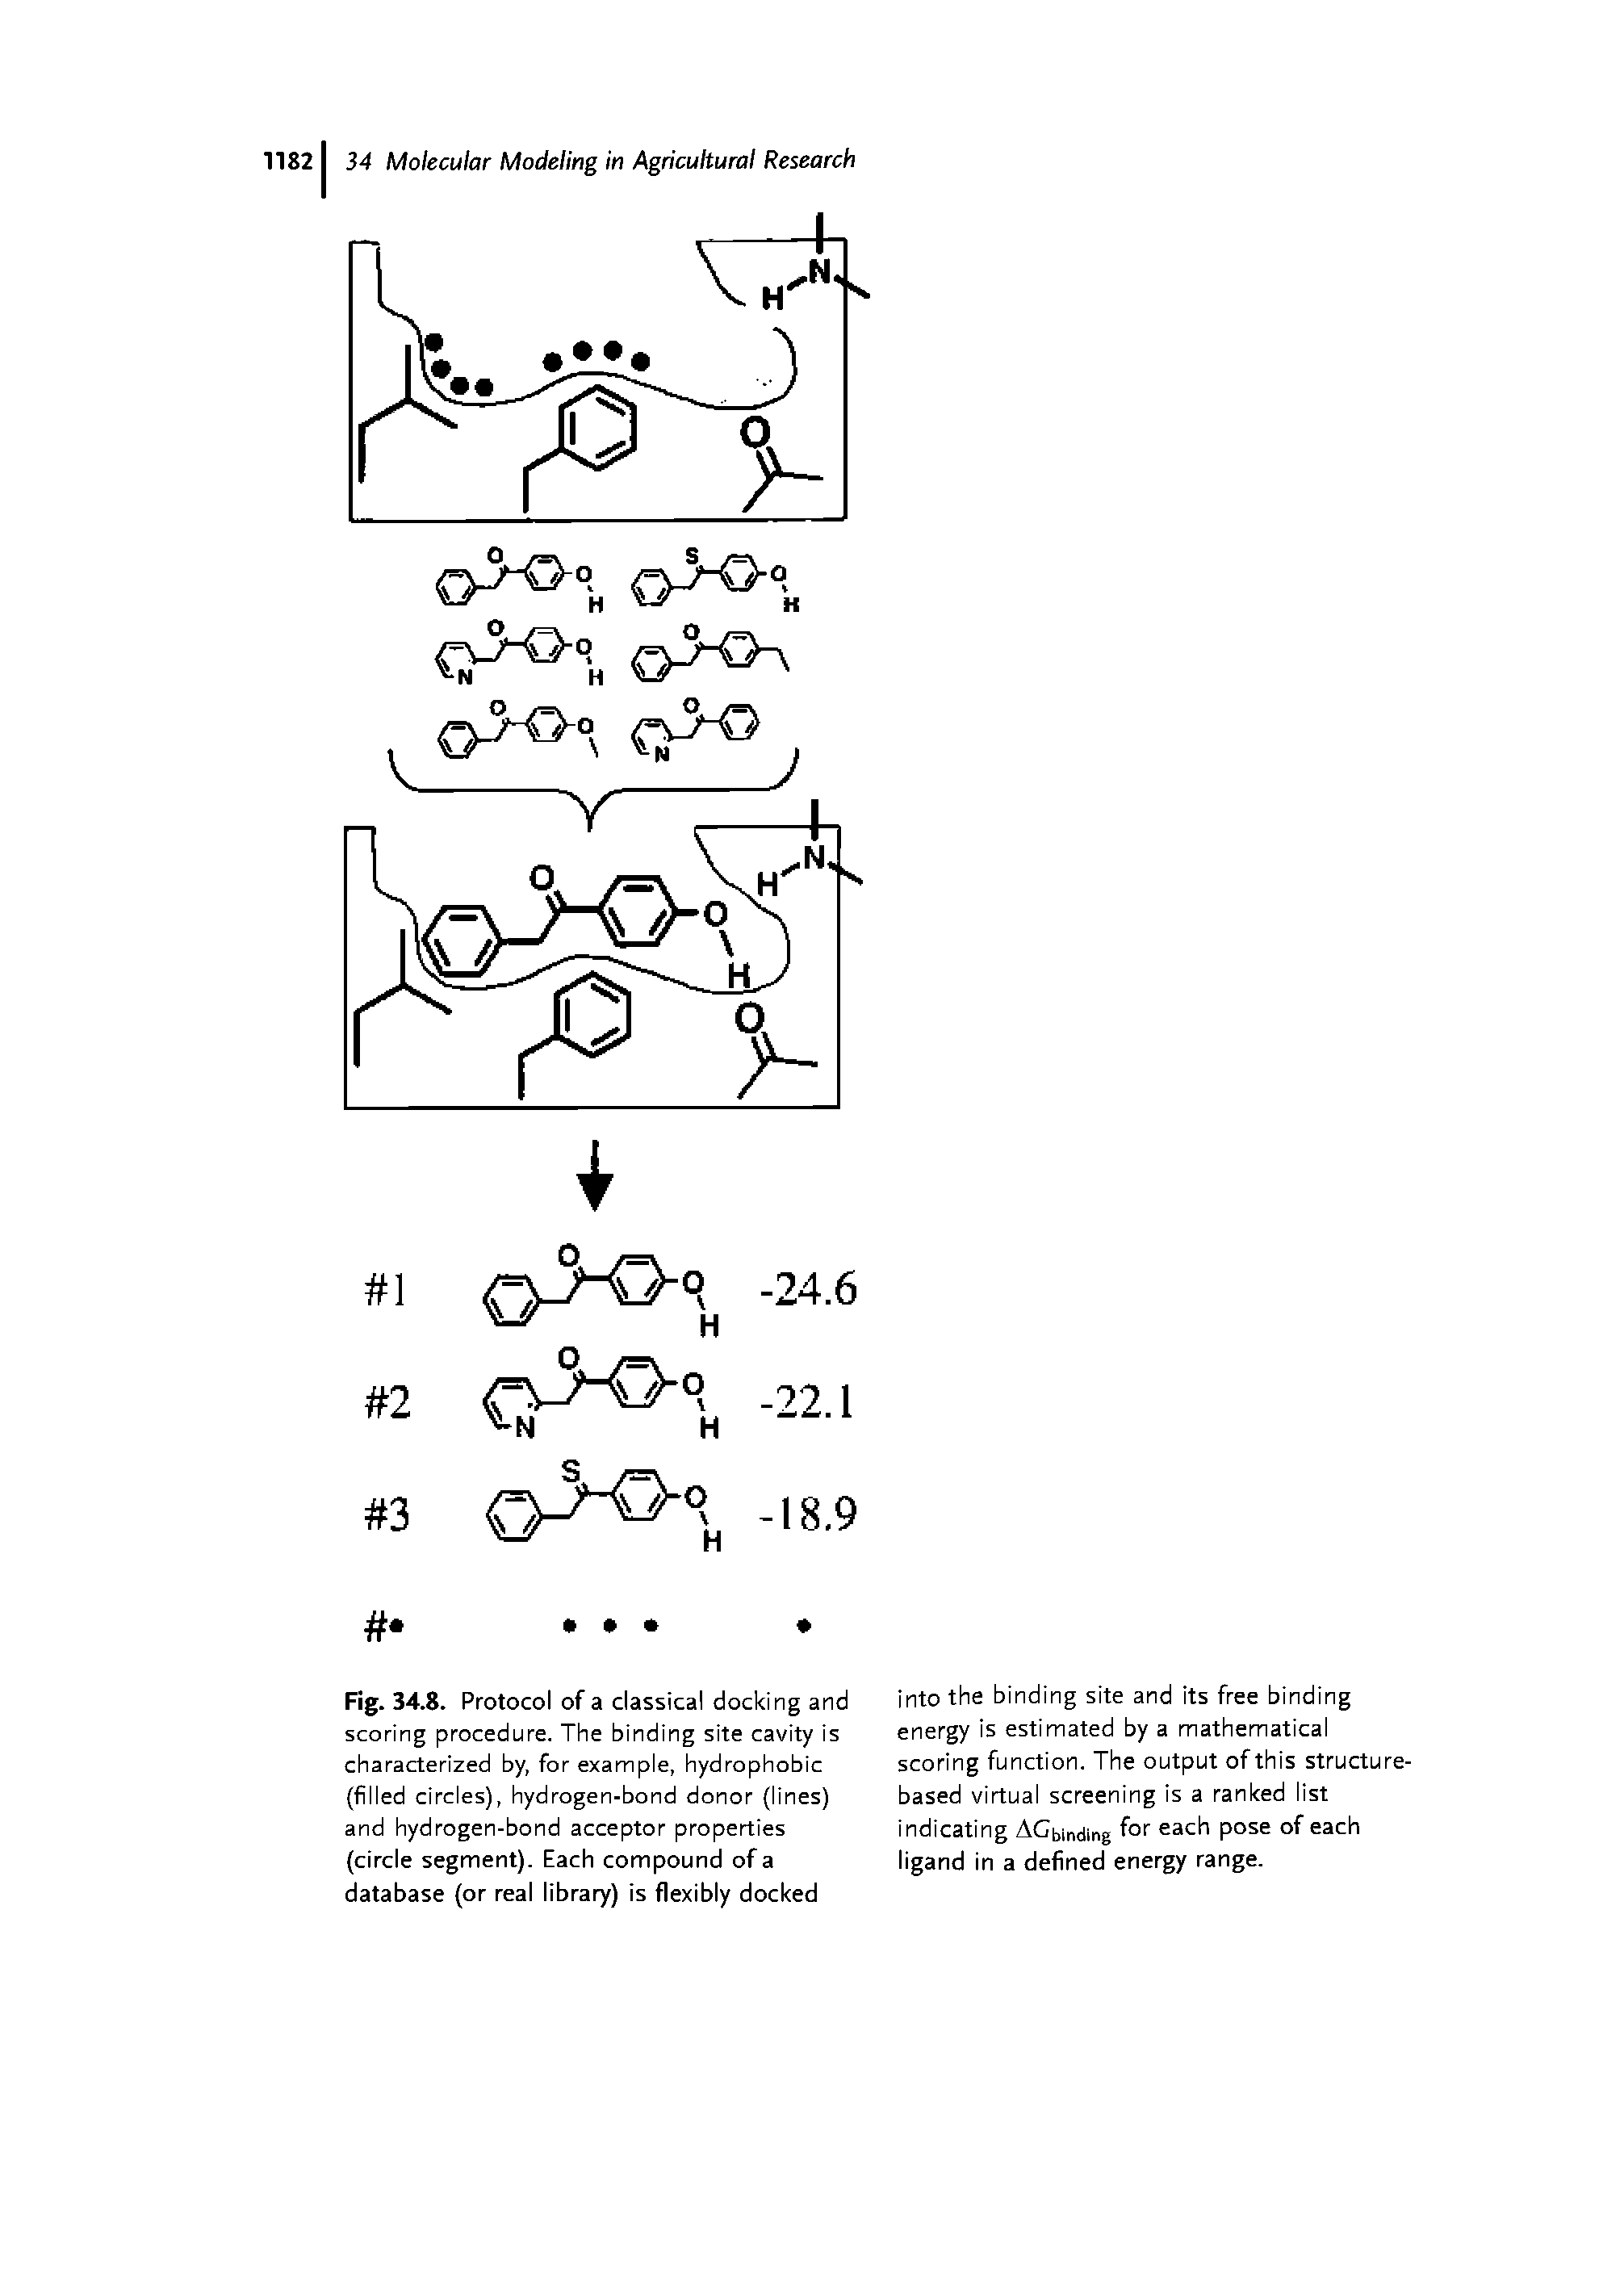 Fig. 34.8. Protocol of a classical clocking and scoring procedure. The binding site cavity is characterized by, for example, hydrophobic filled circles), hydrogen-bond donor (lines) and hydrogen-bond acceptor properties (circle segment). Each compound of a database (or real library) is flexibly docked...